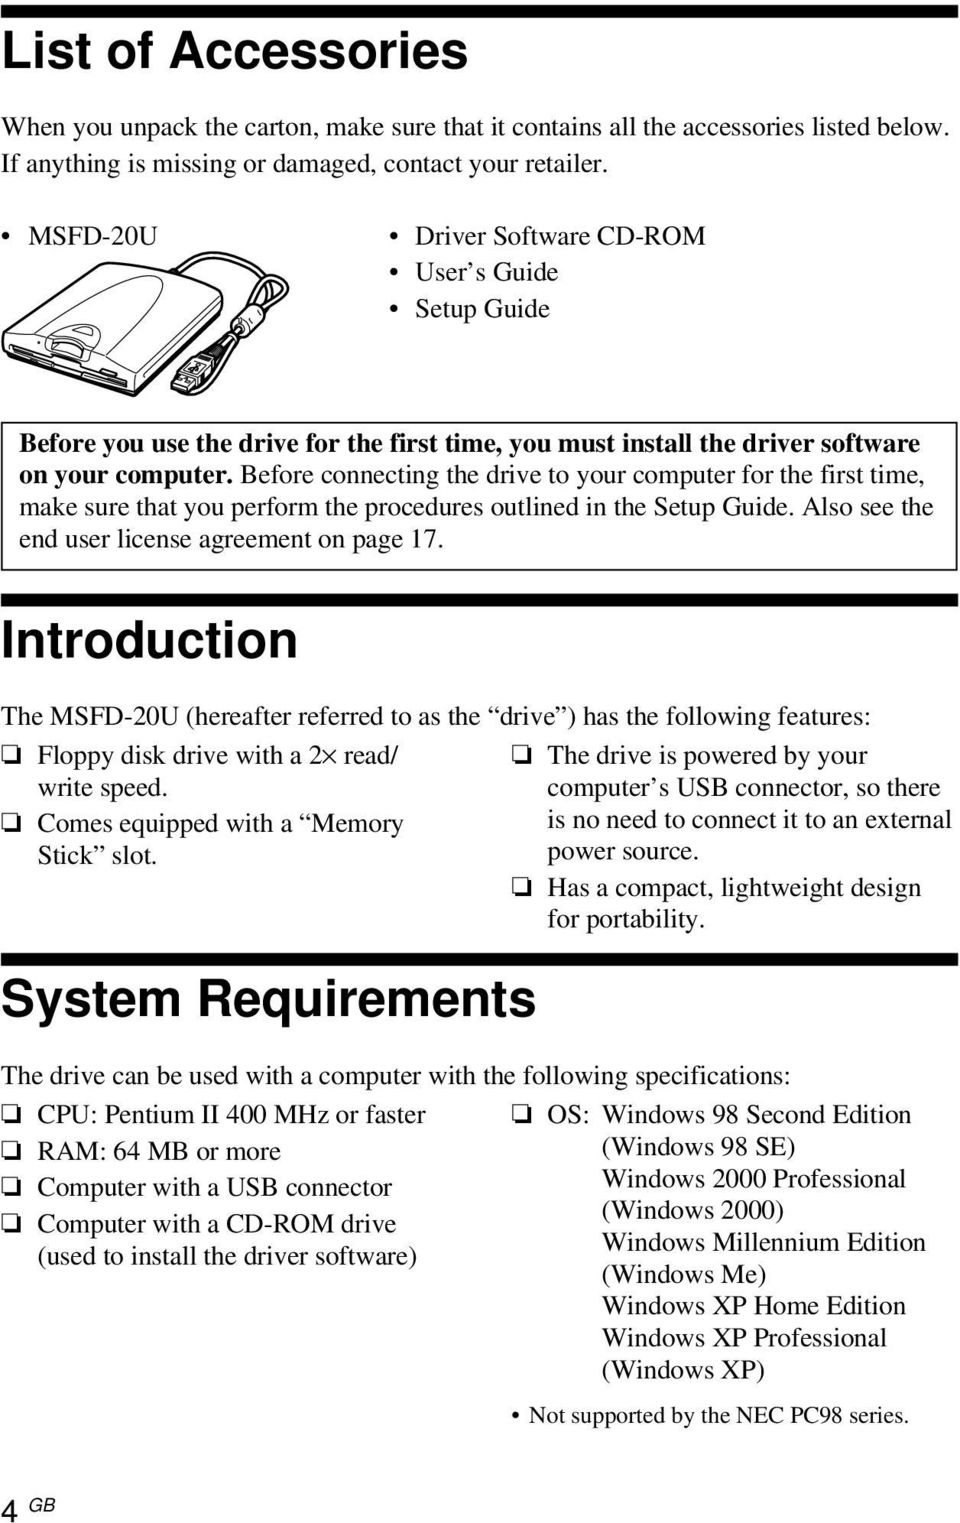 Before connecting the drive to your computer for the first time, make sure that you perform the procedures outlined in the Setup Guide. Also see the end user license agreement on page 17.